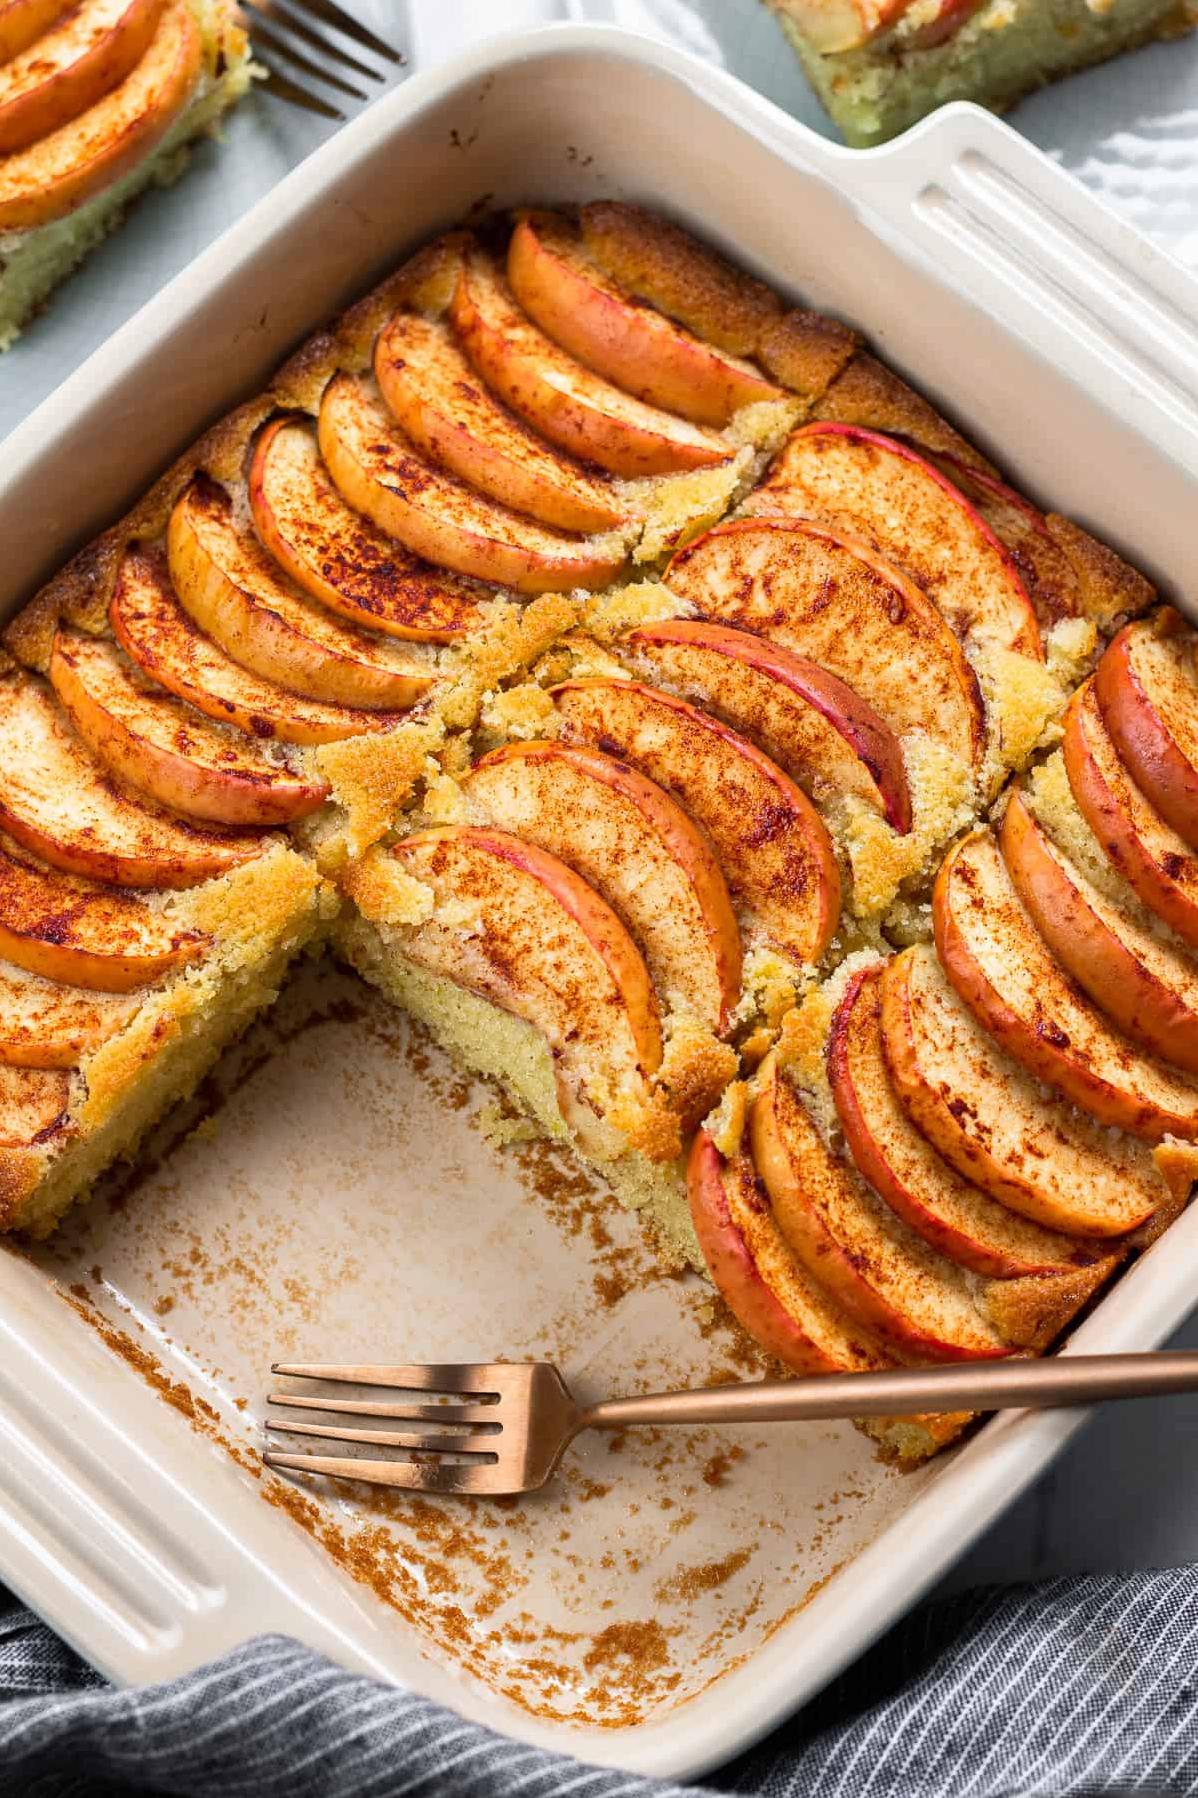  This apple coffee cake is sure to steal the show at your brunch gathering.